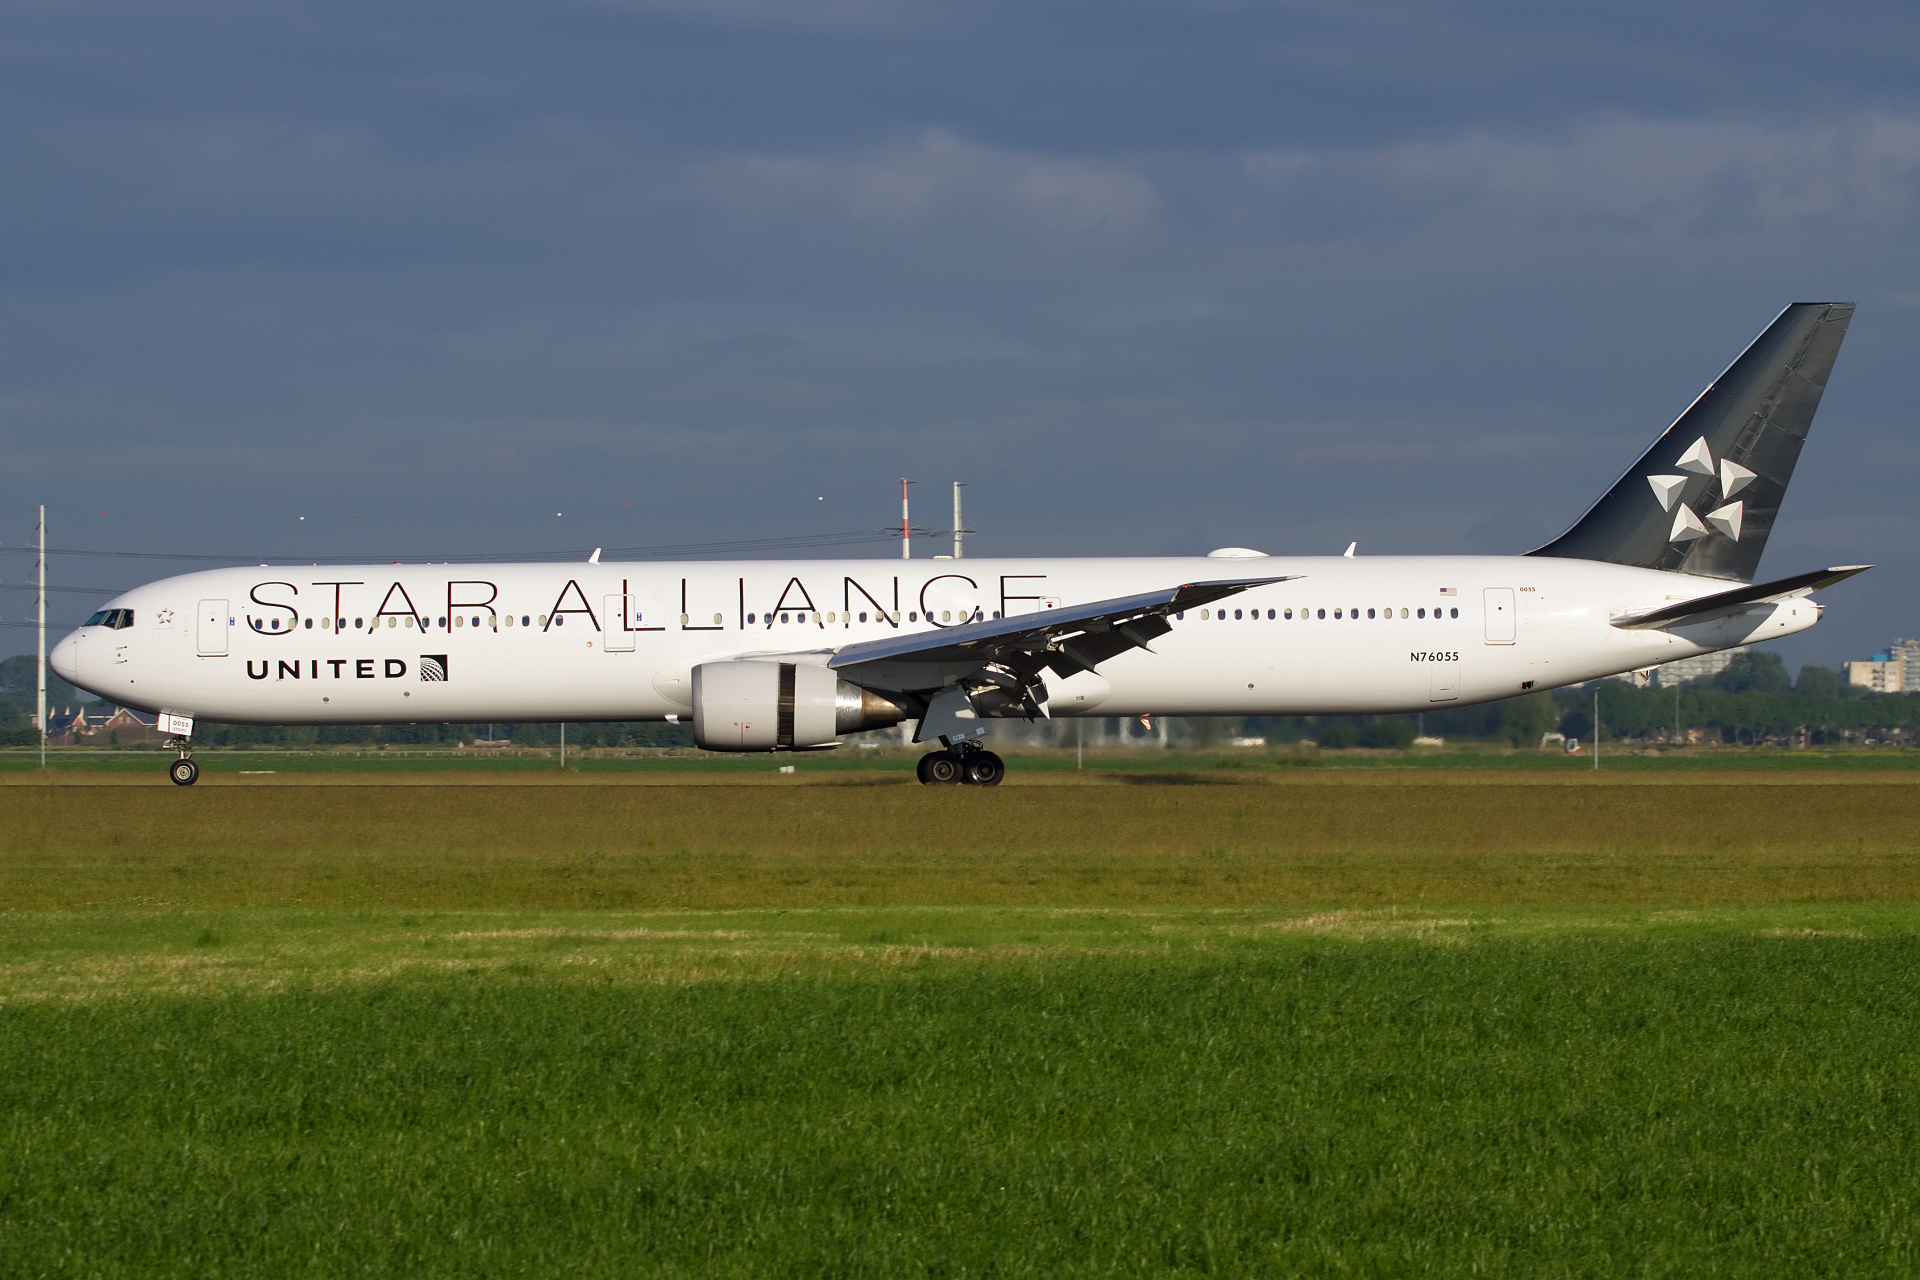 N76055, United Airlines (Star Alliance livery) (Aircraft » Schiphol Spotting » Boeing 767-400)